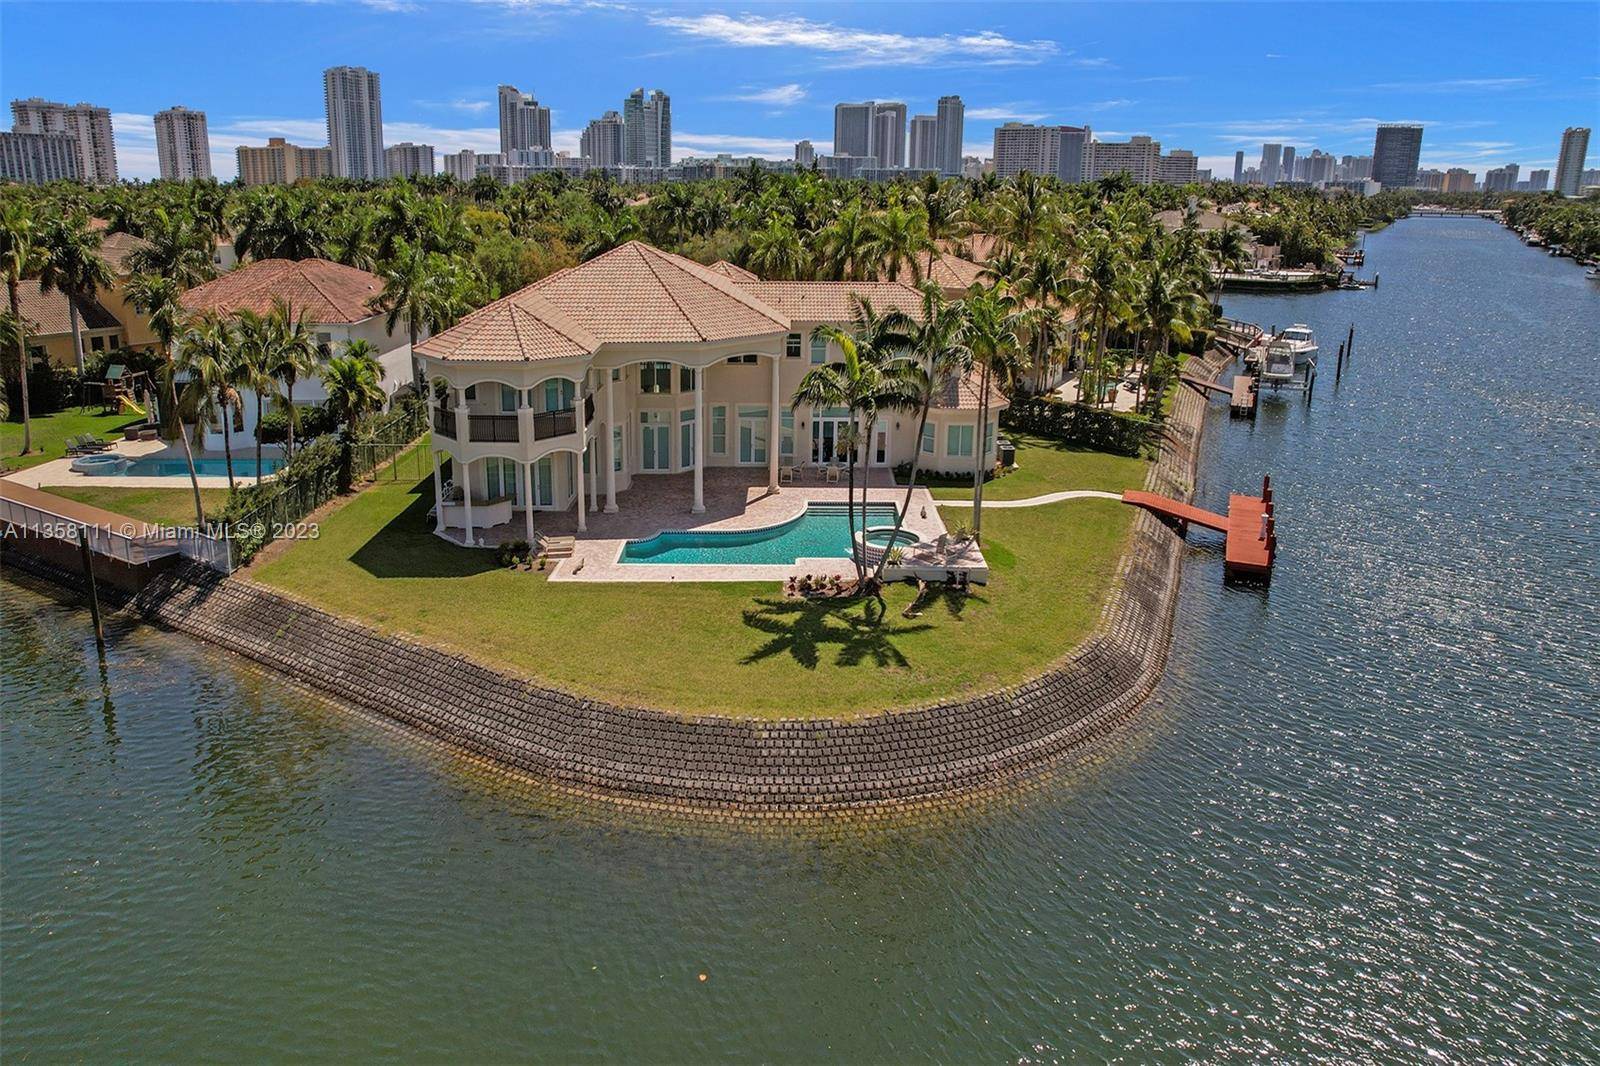 One of a kind waterfront custom built home has everything you would expect.